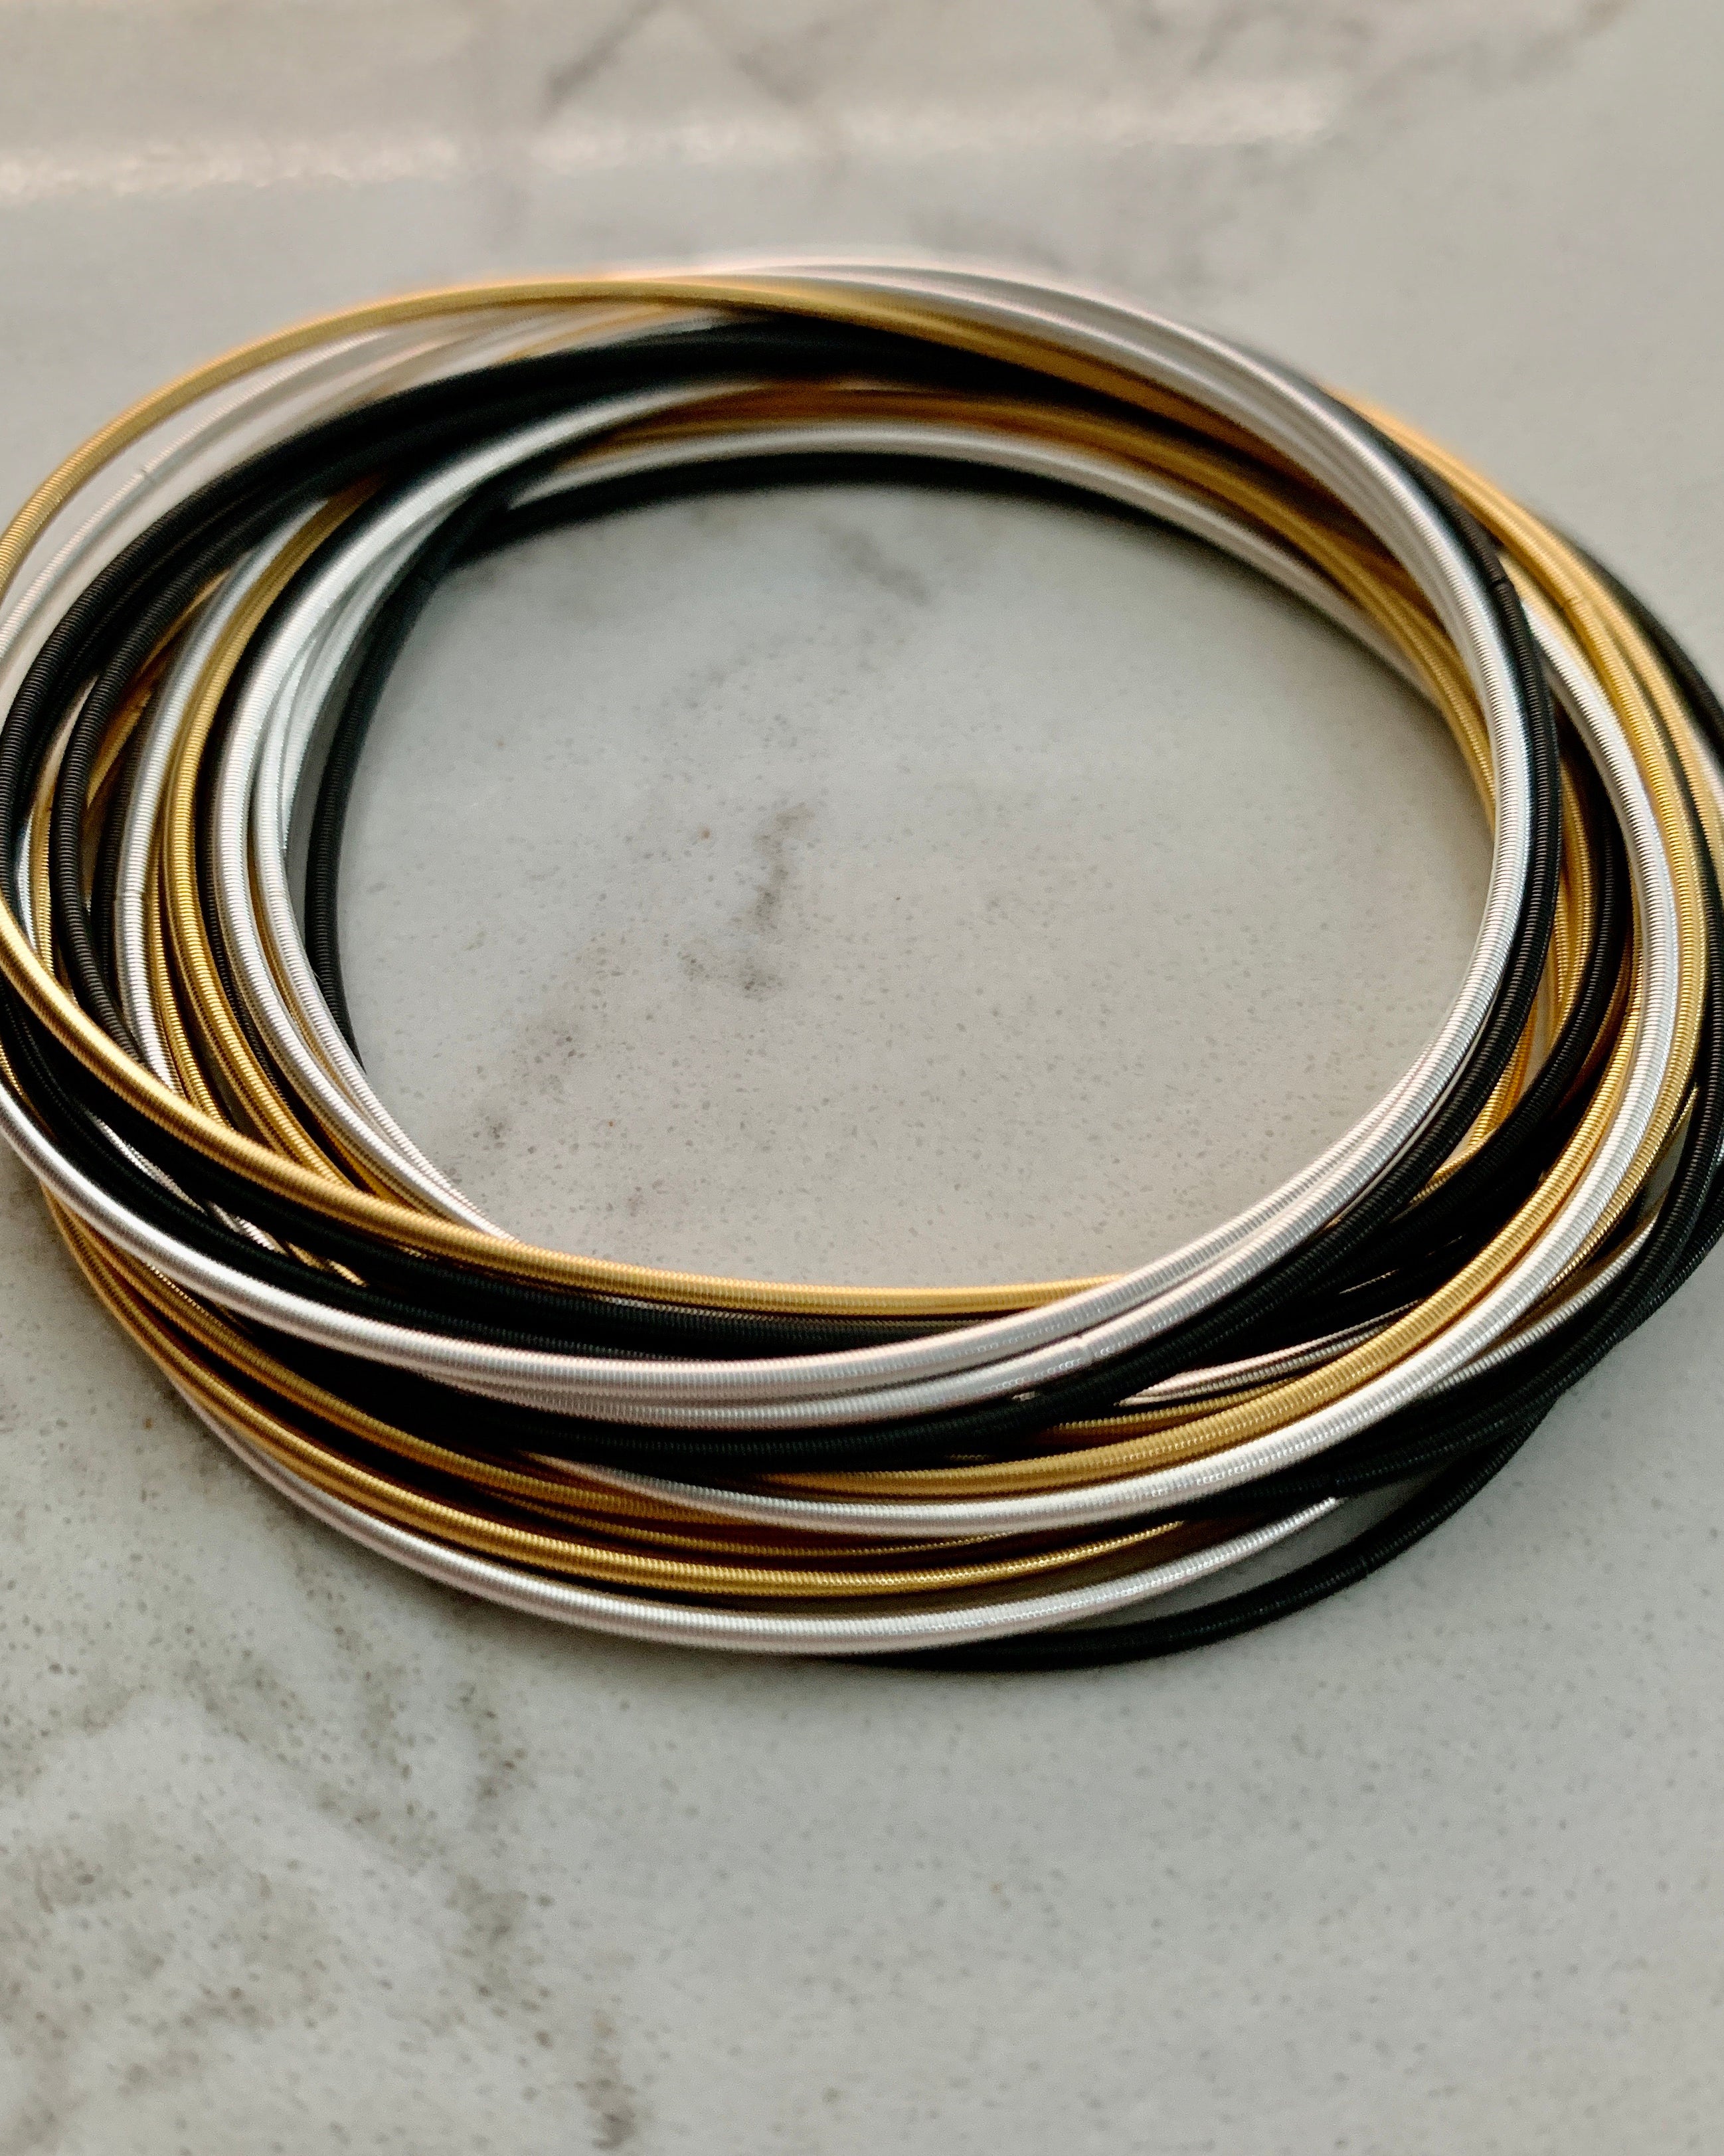 Stainless Steel Tri-Mix Plated Guitar String Bracelets - Set of 20.